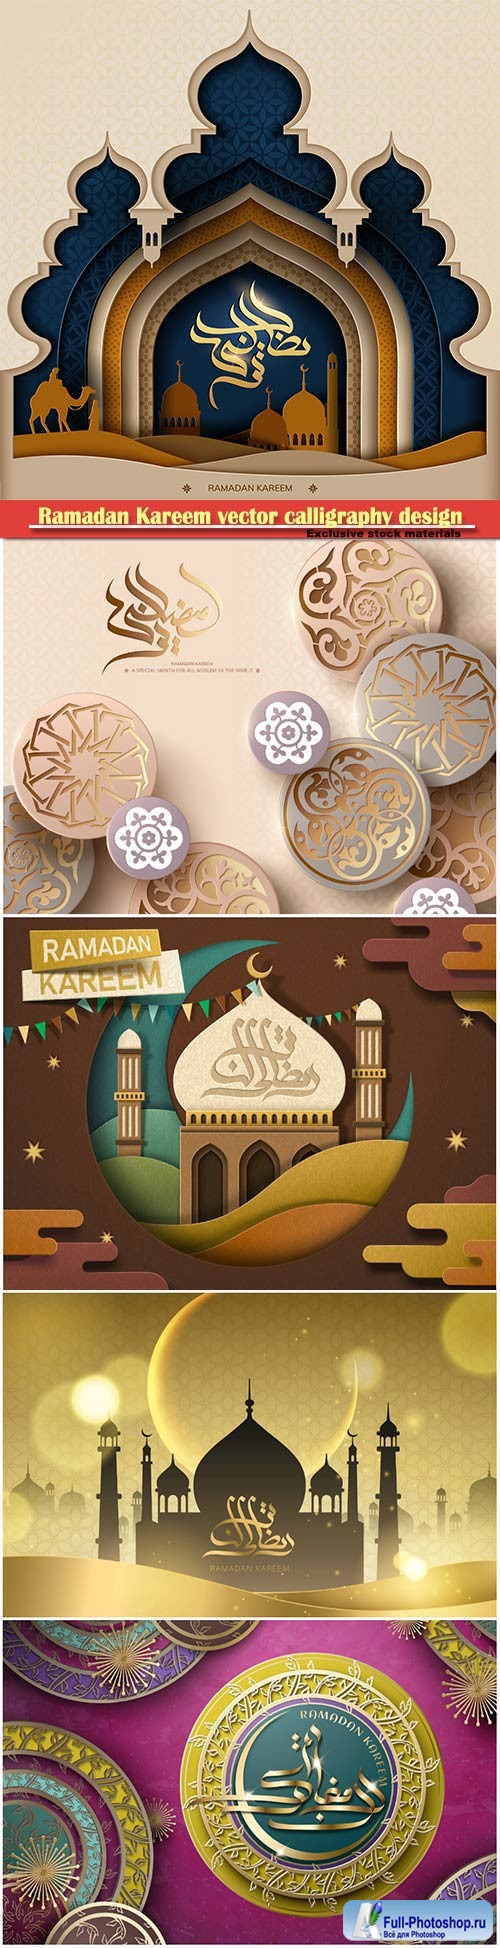 Ramadan Kareem vector calligraphy design with decorative floral pattern,mosque silhouette, crescent and glittering islamic background # 2